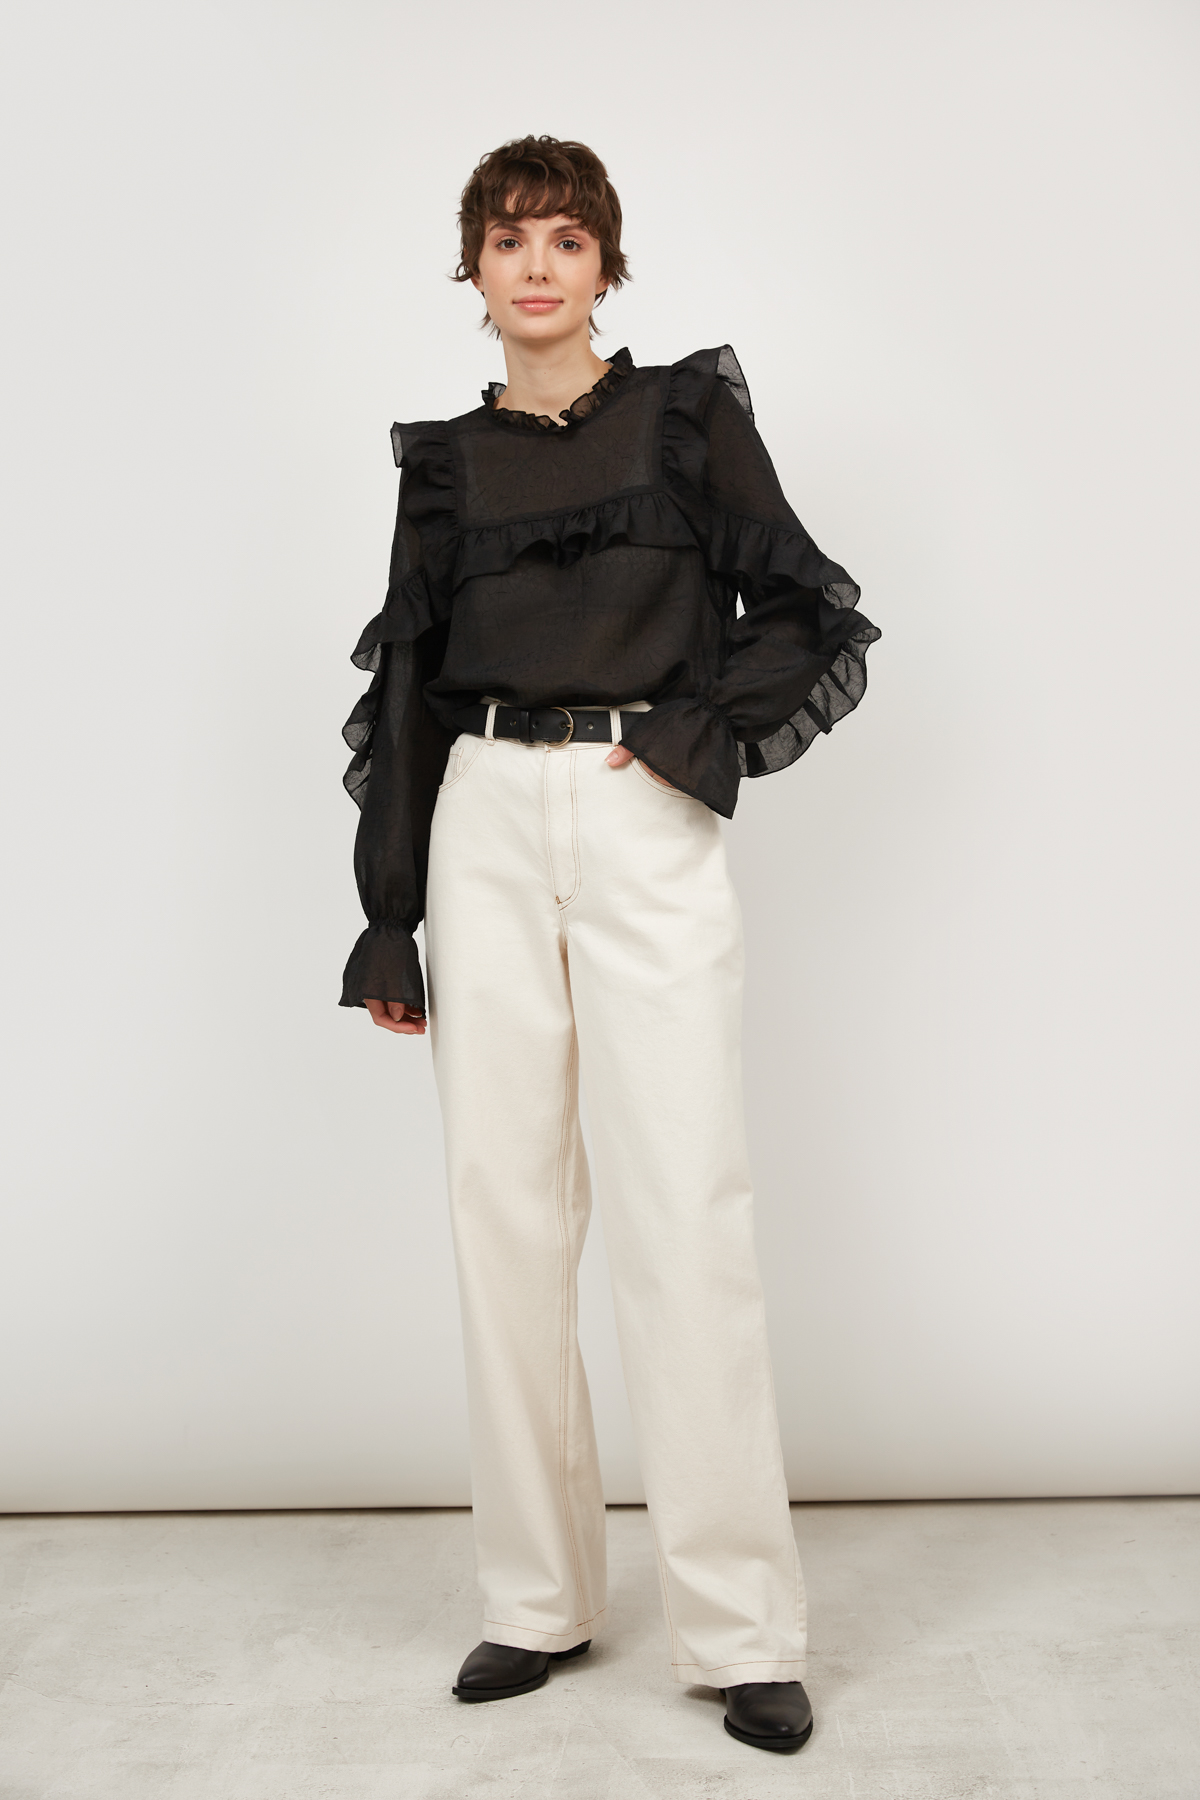 Blouse with ruffles in wrinkled chiffon in black, photo 2